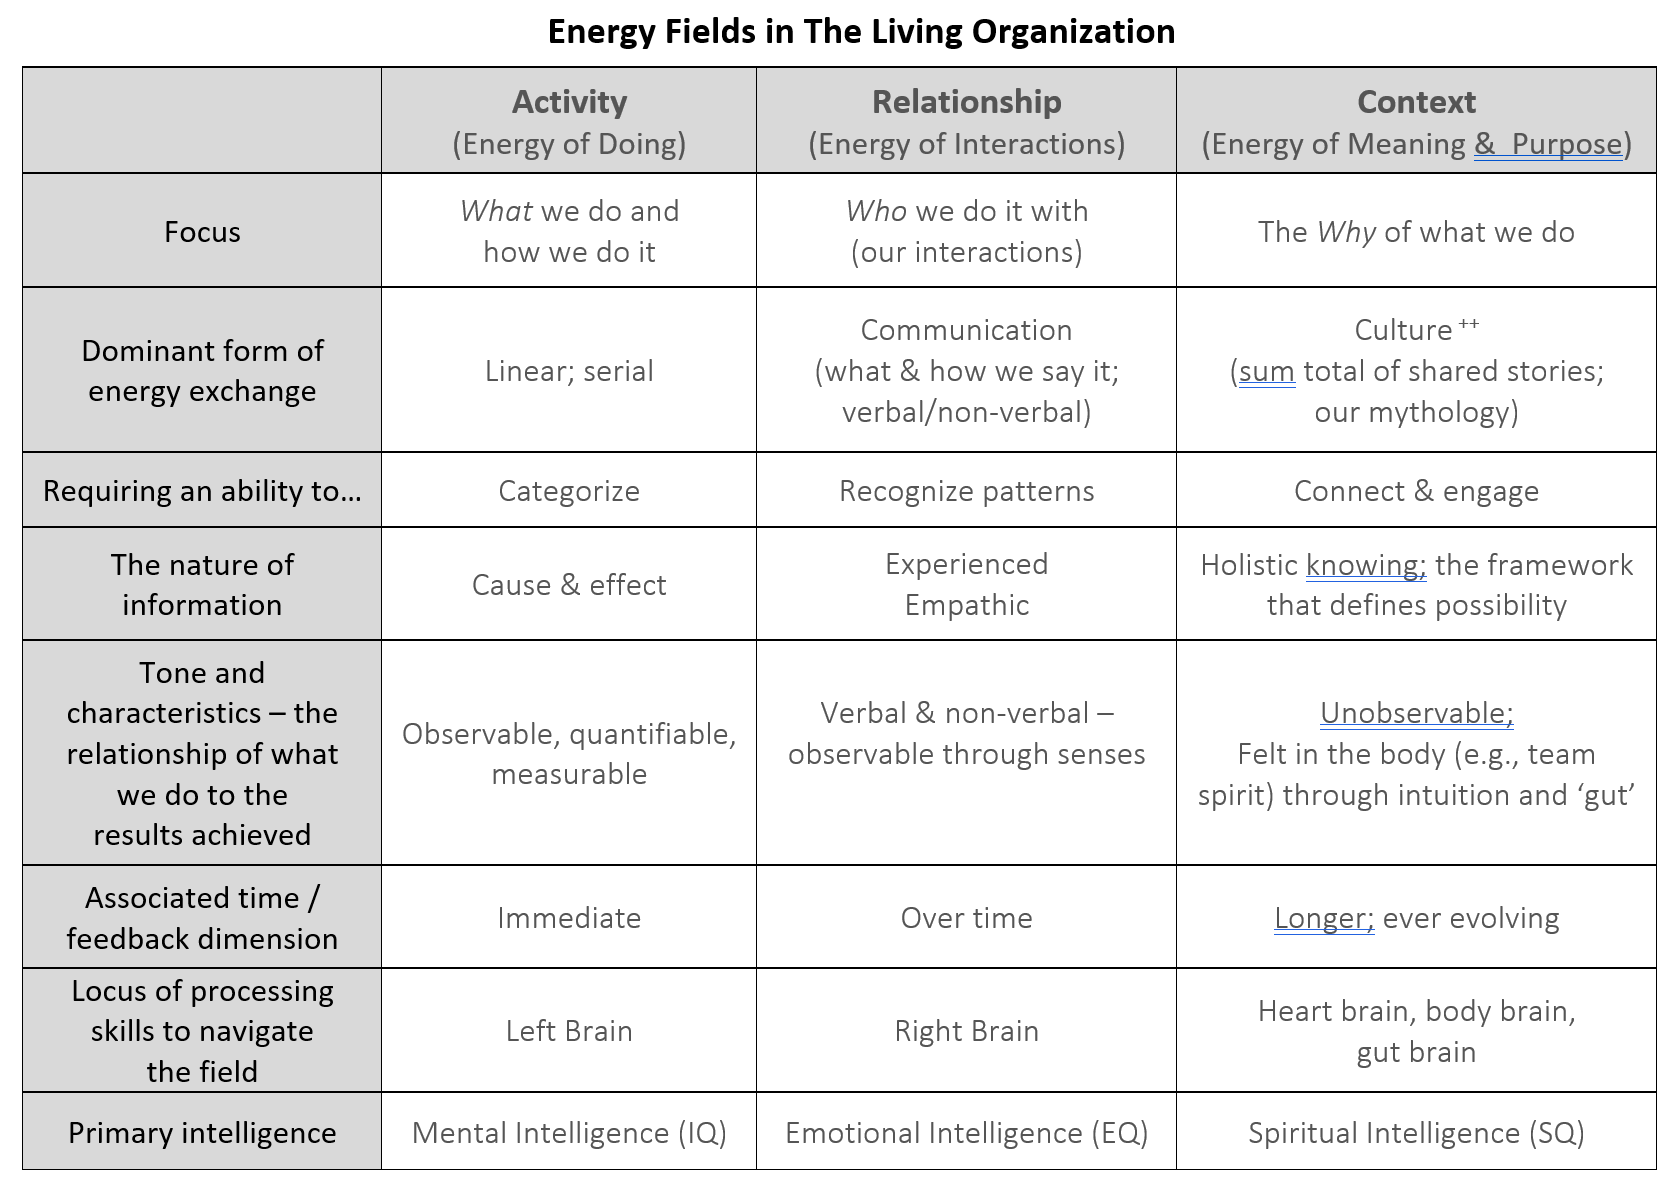 energy_fields_inthe_living_org.PNG